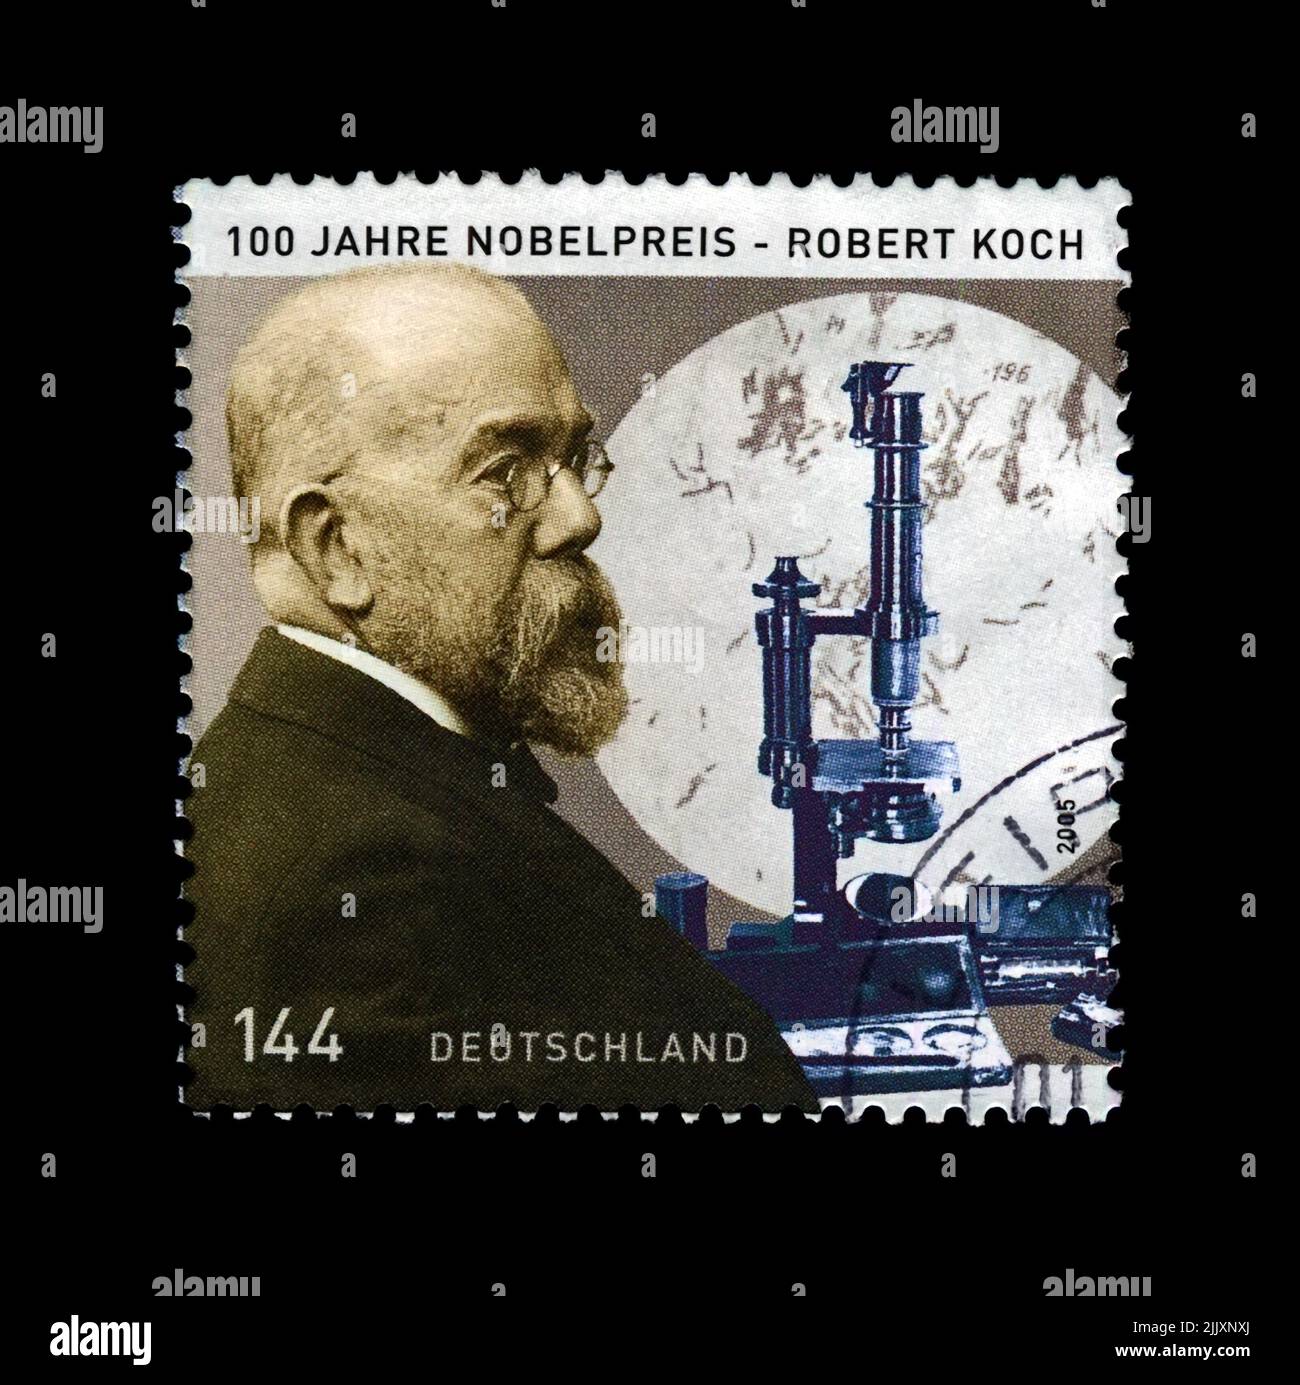 Robert Koch (1843-1910), discoverer prevent of tubercle bacillus, Nobel Medicine Prize, circa 2005. stamp printed in Germany isolated on black Stock Photo